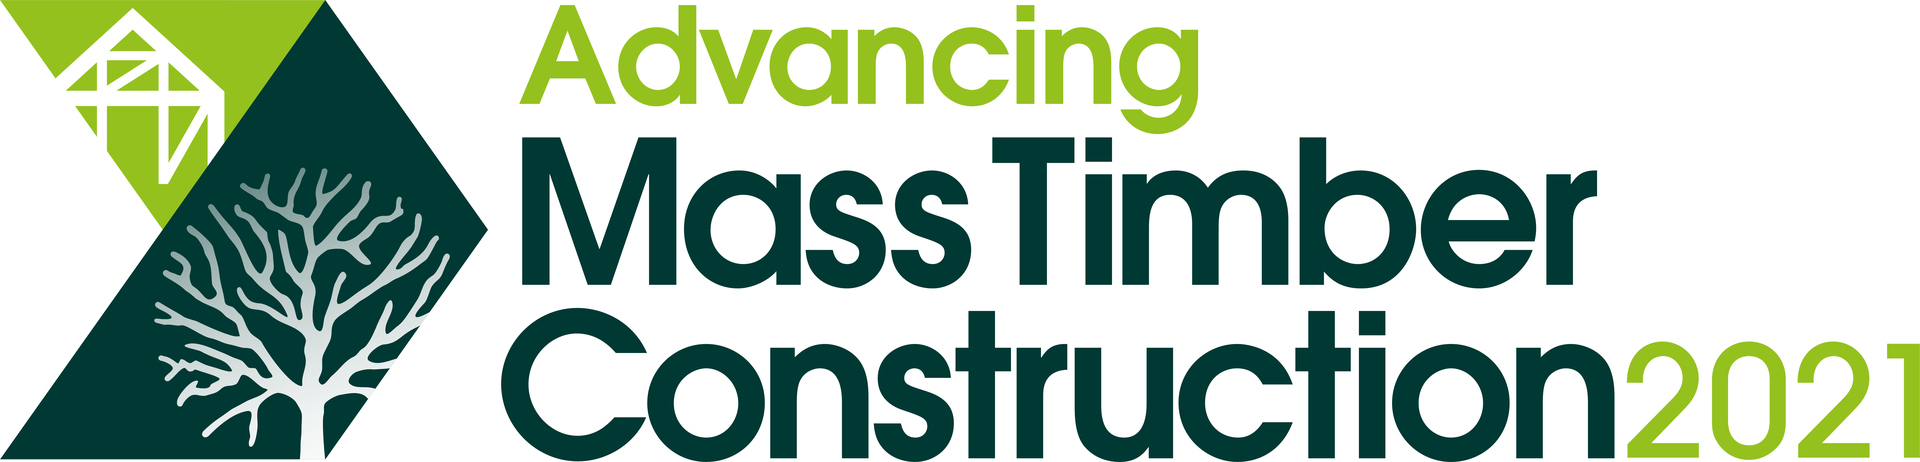 Advancing Mass Timber Construction 2021 Conference | Dallas, TX